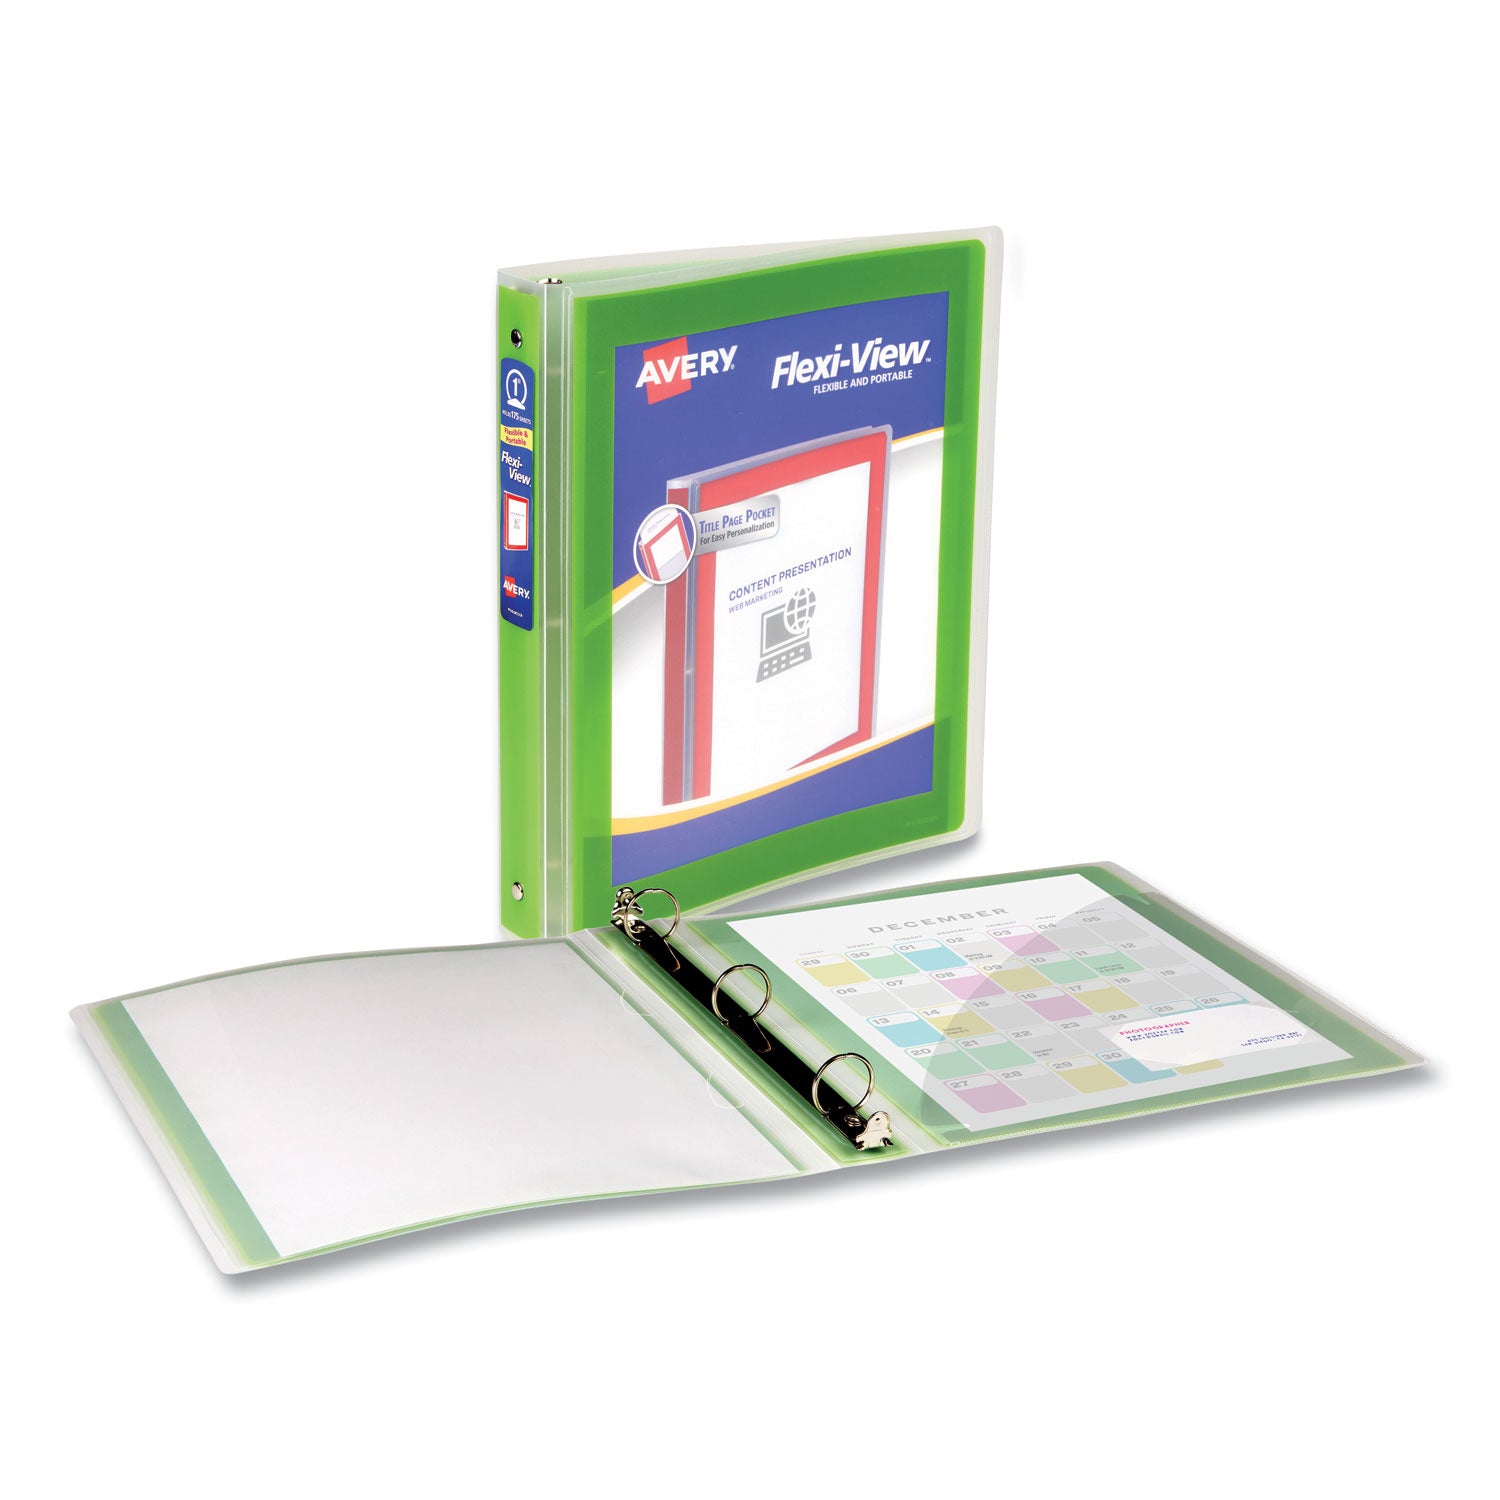 flexi-view-binder-with-round-rings-3-rings-1-capacity-11-x-85-green_ave17608 - 2